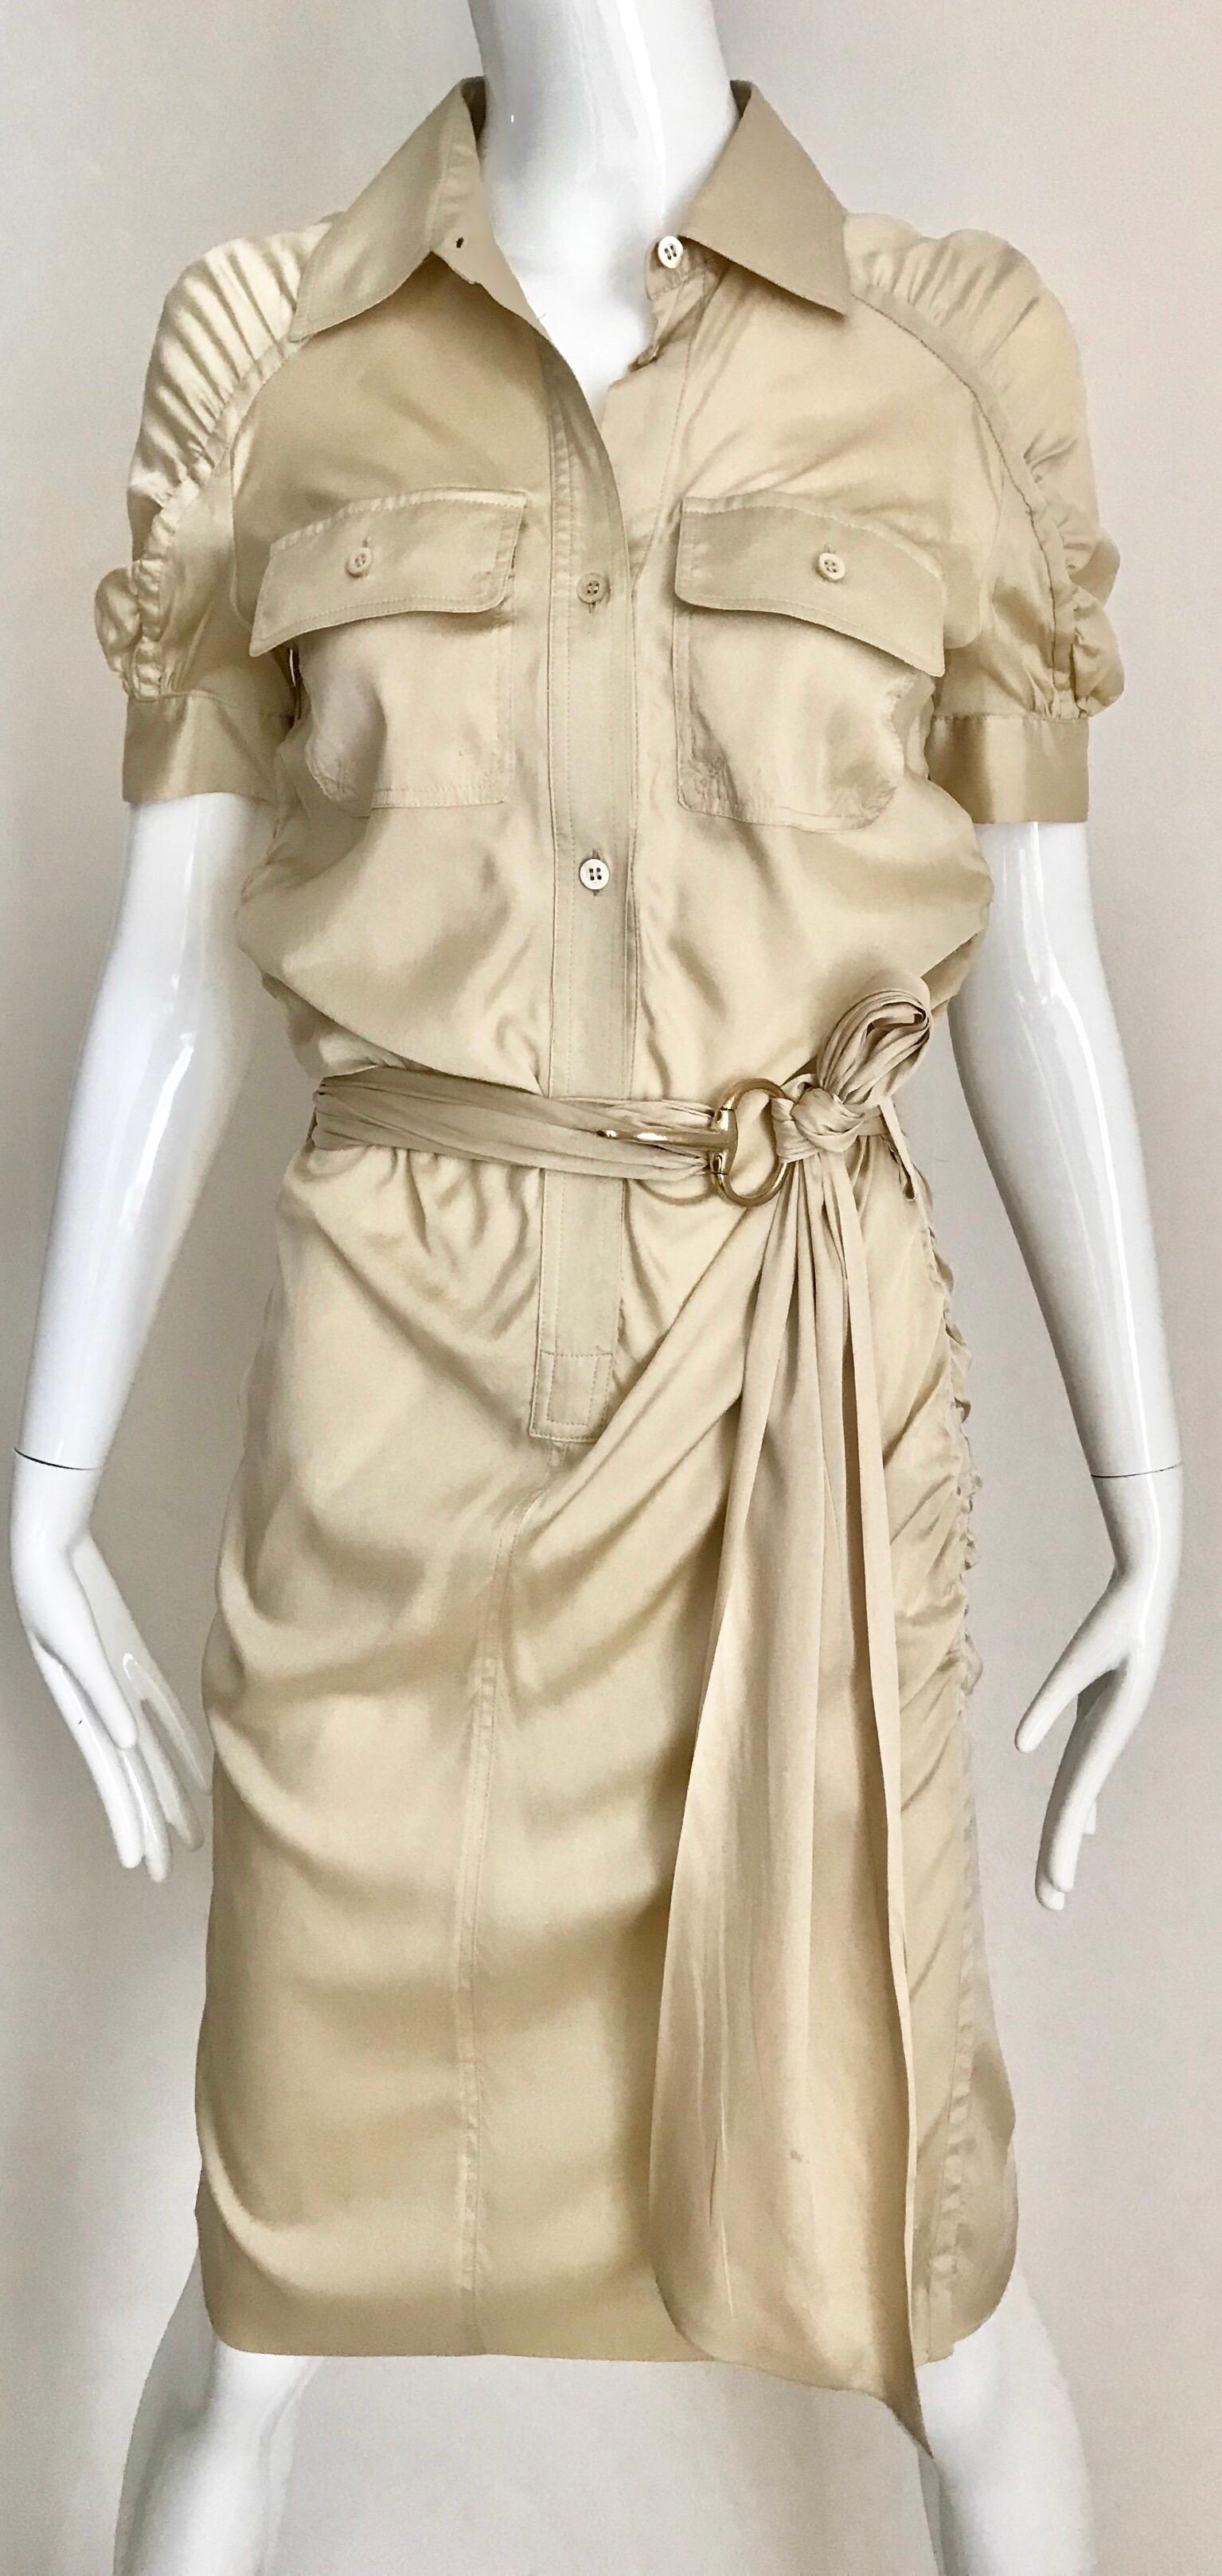 Gucci by Tom Ford tan silk shirt dress with belt.
Size: Small
Marked size 40 but it fit smaller. ( small smudge near pocket) see image attached
Bust: 32 inches/ Hip: 34 inches.
**** This Garment has been professionally Dry Cleaned and Ready to